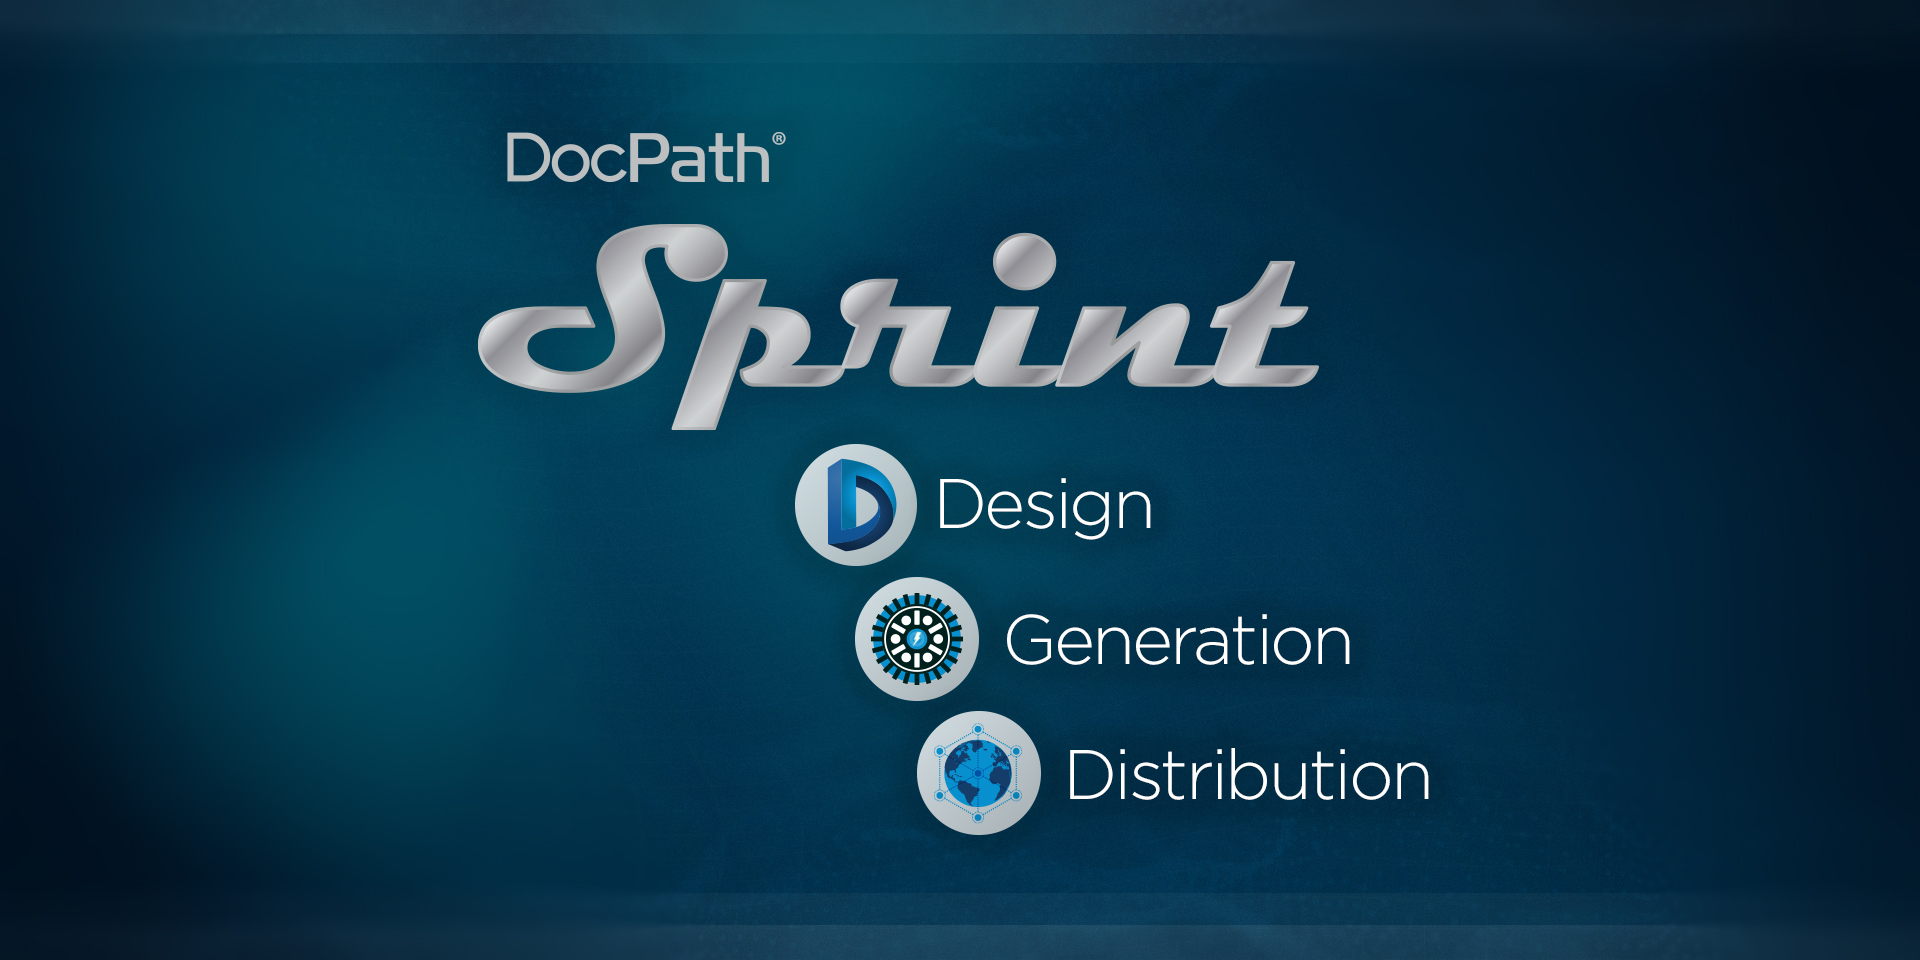 DocPath Sprint integrates seamlessly with any architecture and provides multi-platform support that runs on any operating system, including Windows, Linux or IBMi system.